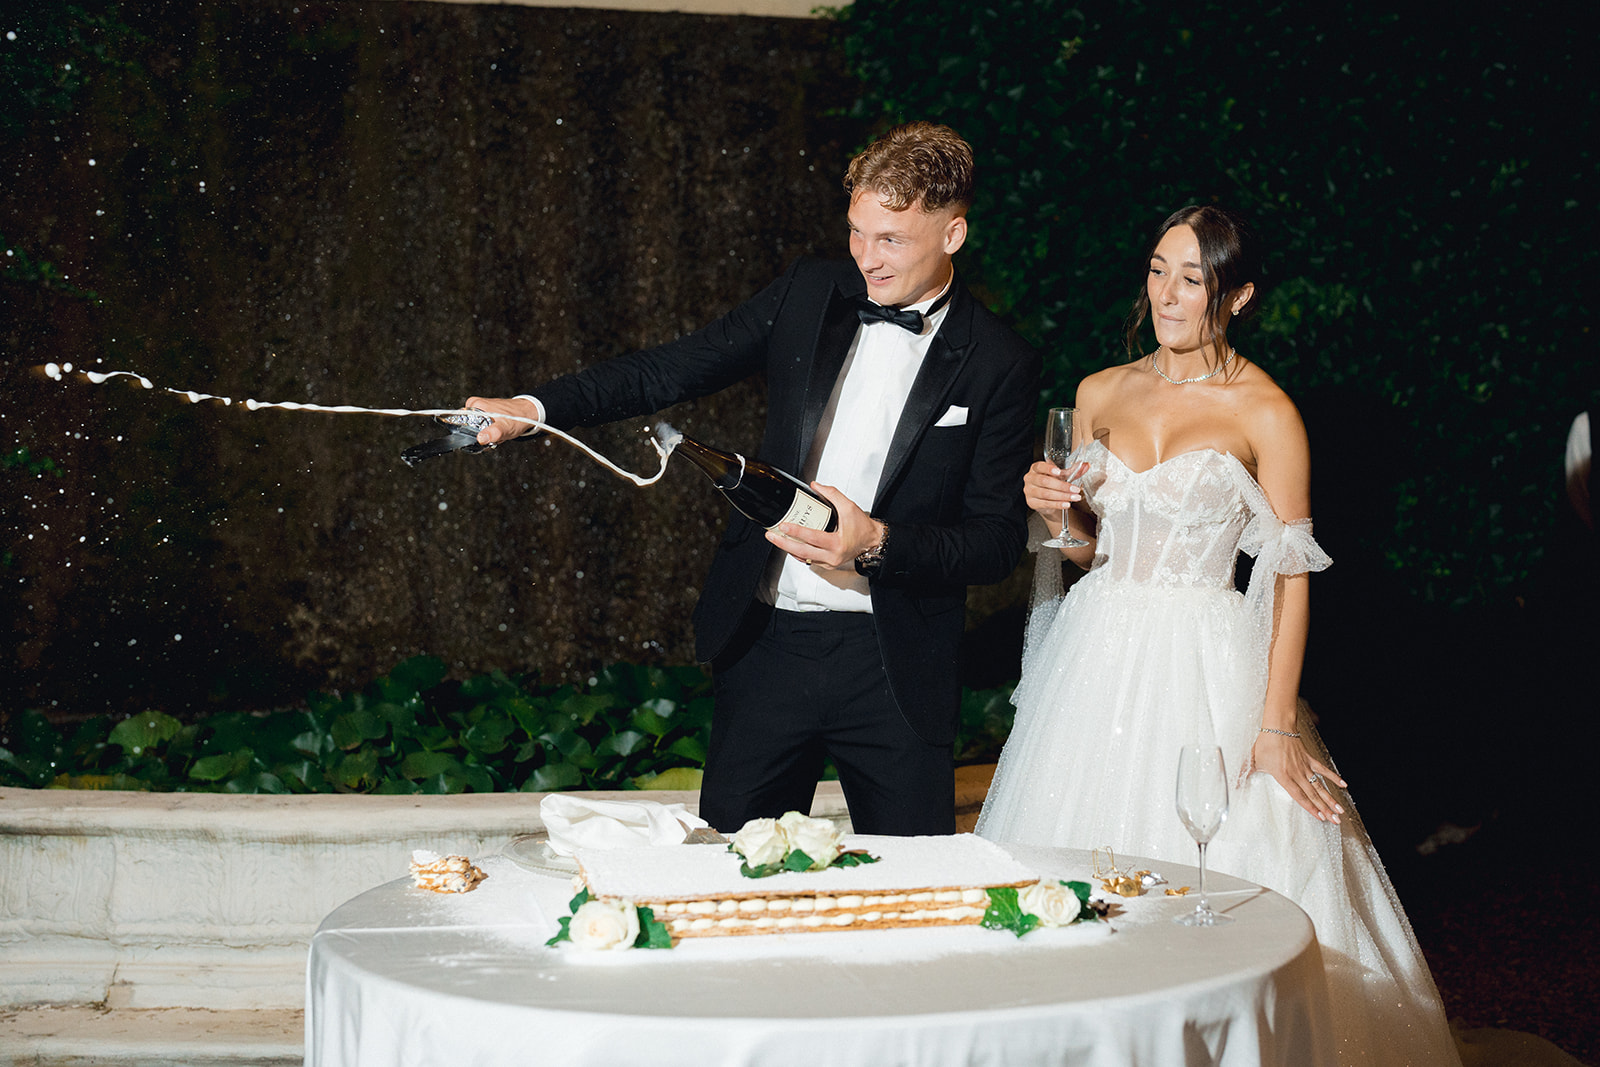 The groom opens the champagne bottle with a saber